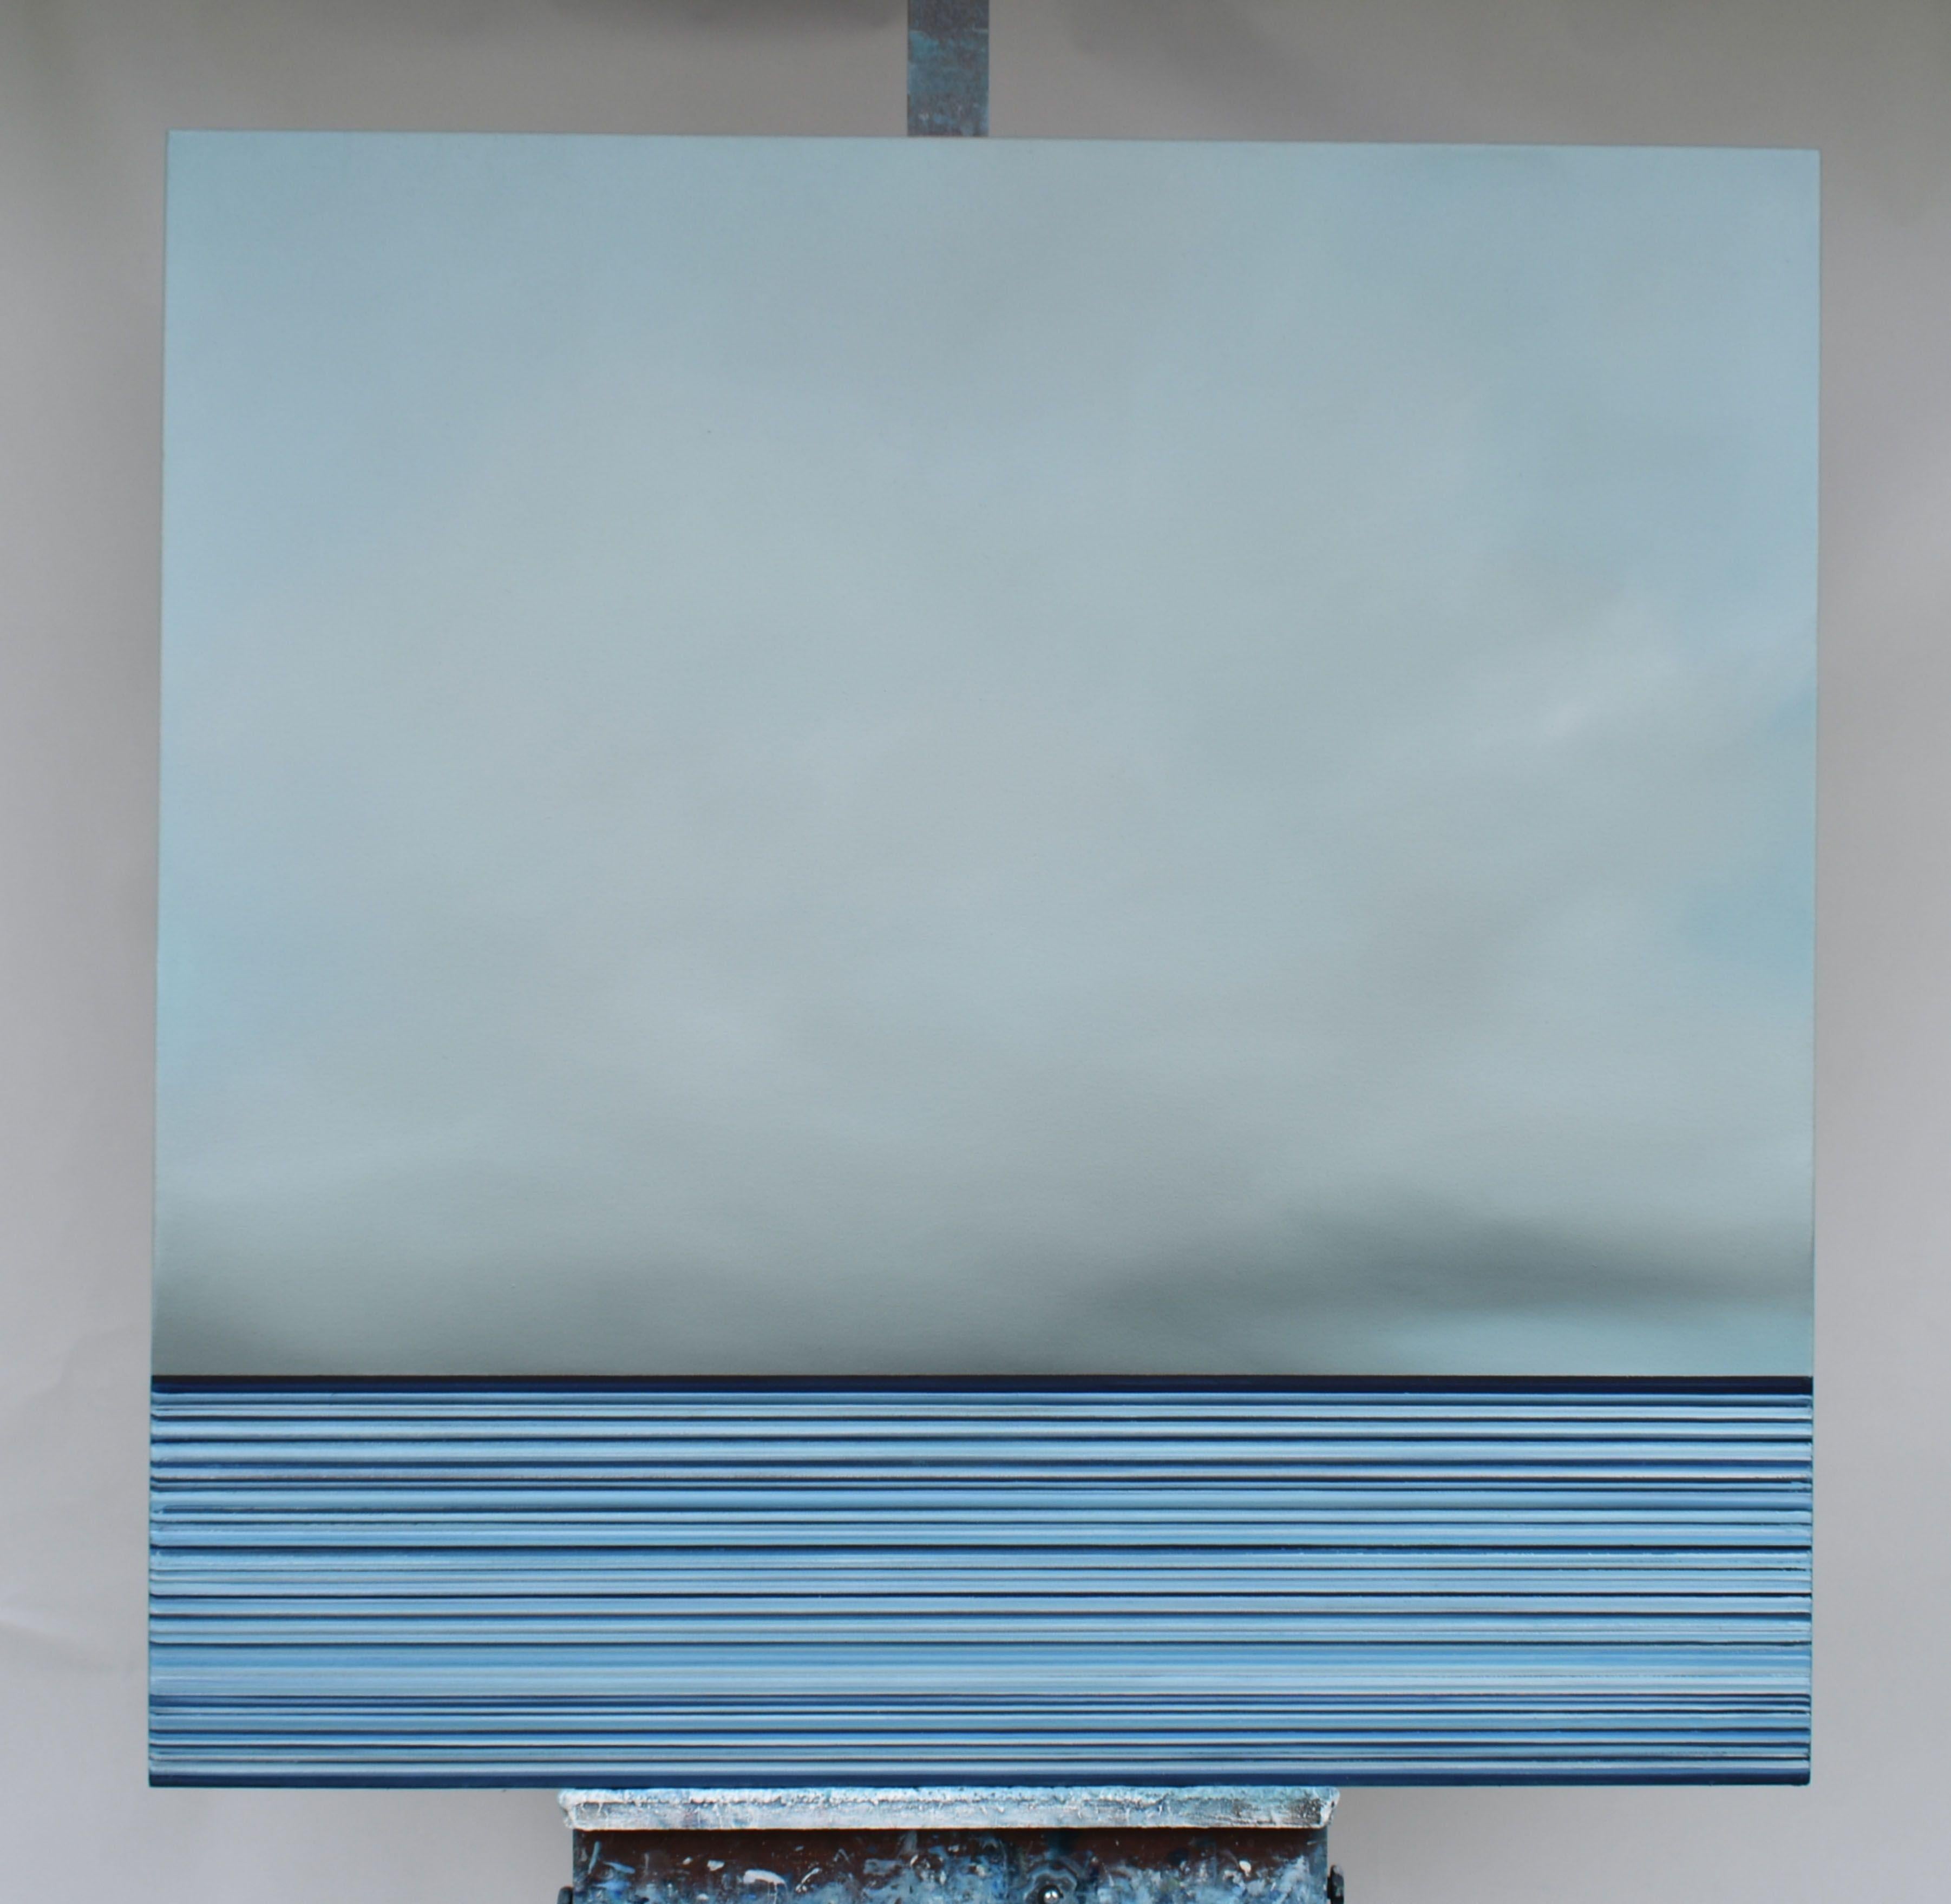 Original minimalist seascape, inspired by the coastline of the Pacific Ocean. Created using high quality oil paint on gallery wrapped, hand stretched and gessoed 12oz cotton canvas. The sides of the painting are finished as a continuation of the